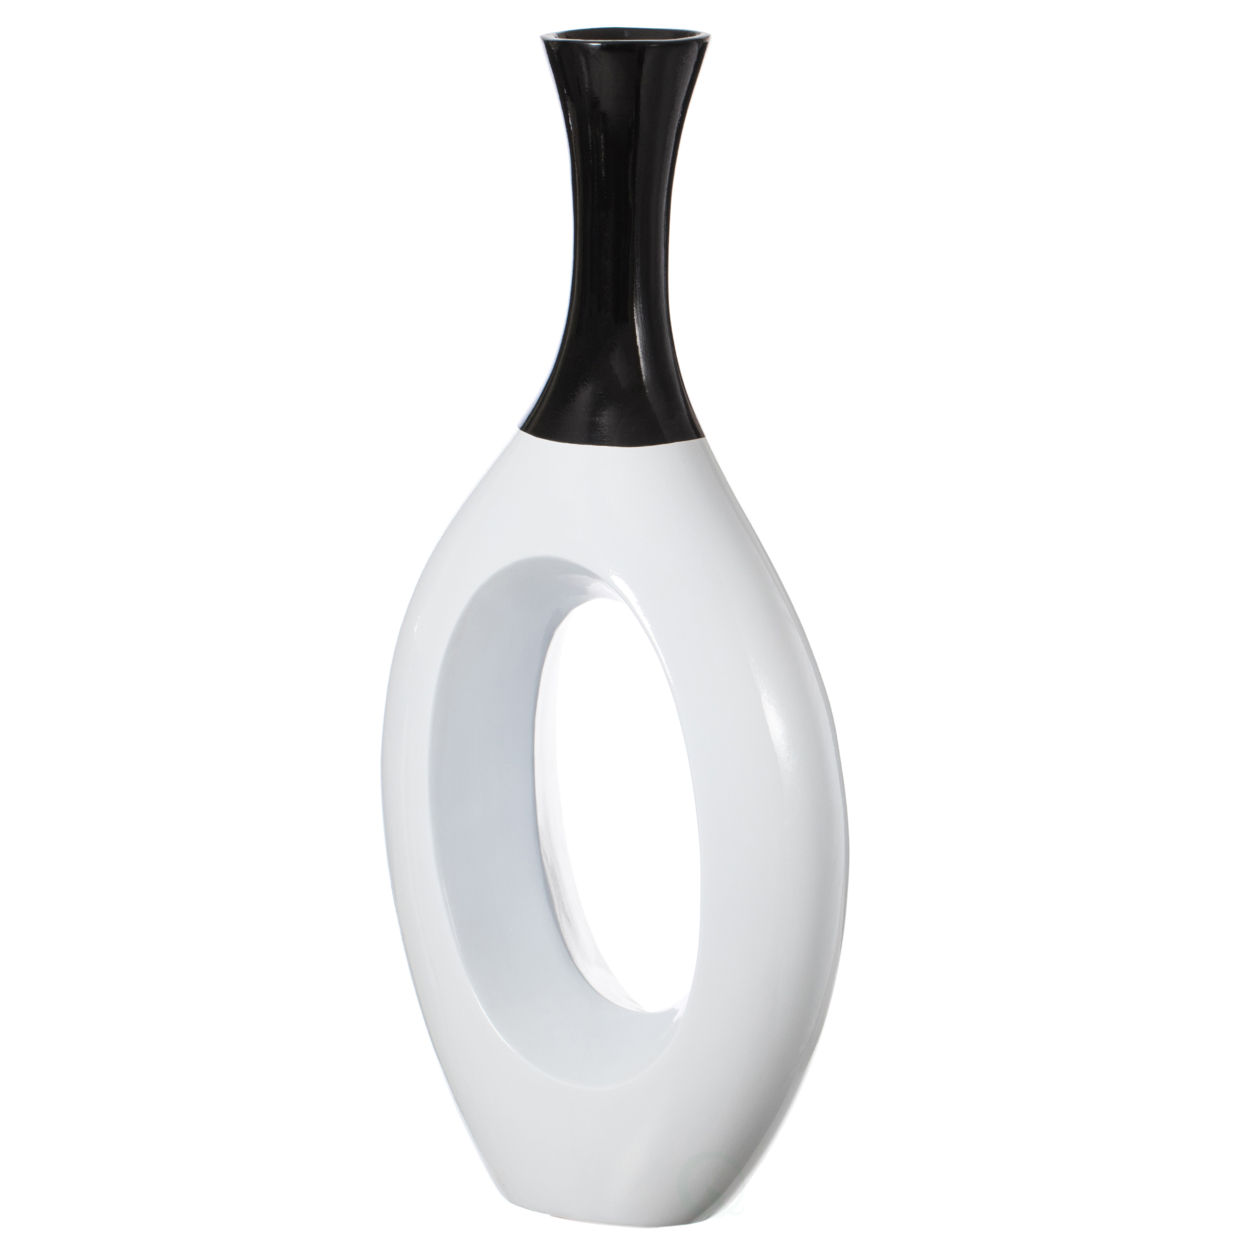 Contemporary Decorative White Floor Flower Vase With Black Neck, For Living Room, Entryway Or Dining Room, 36 Inch